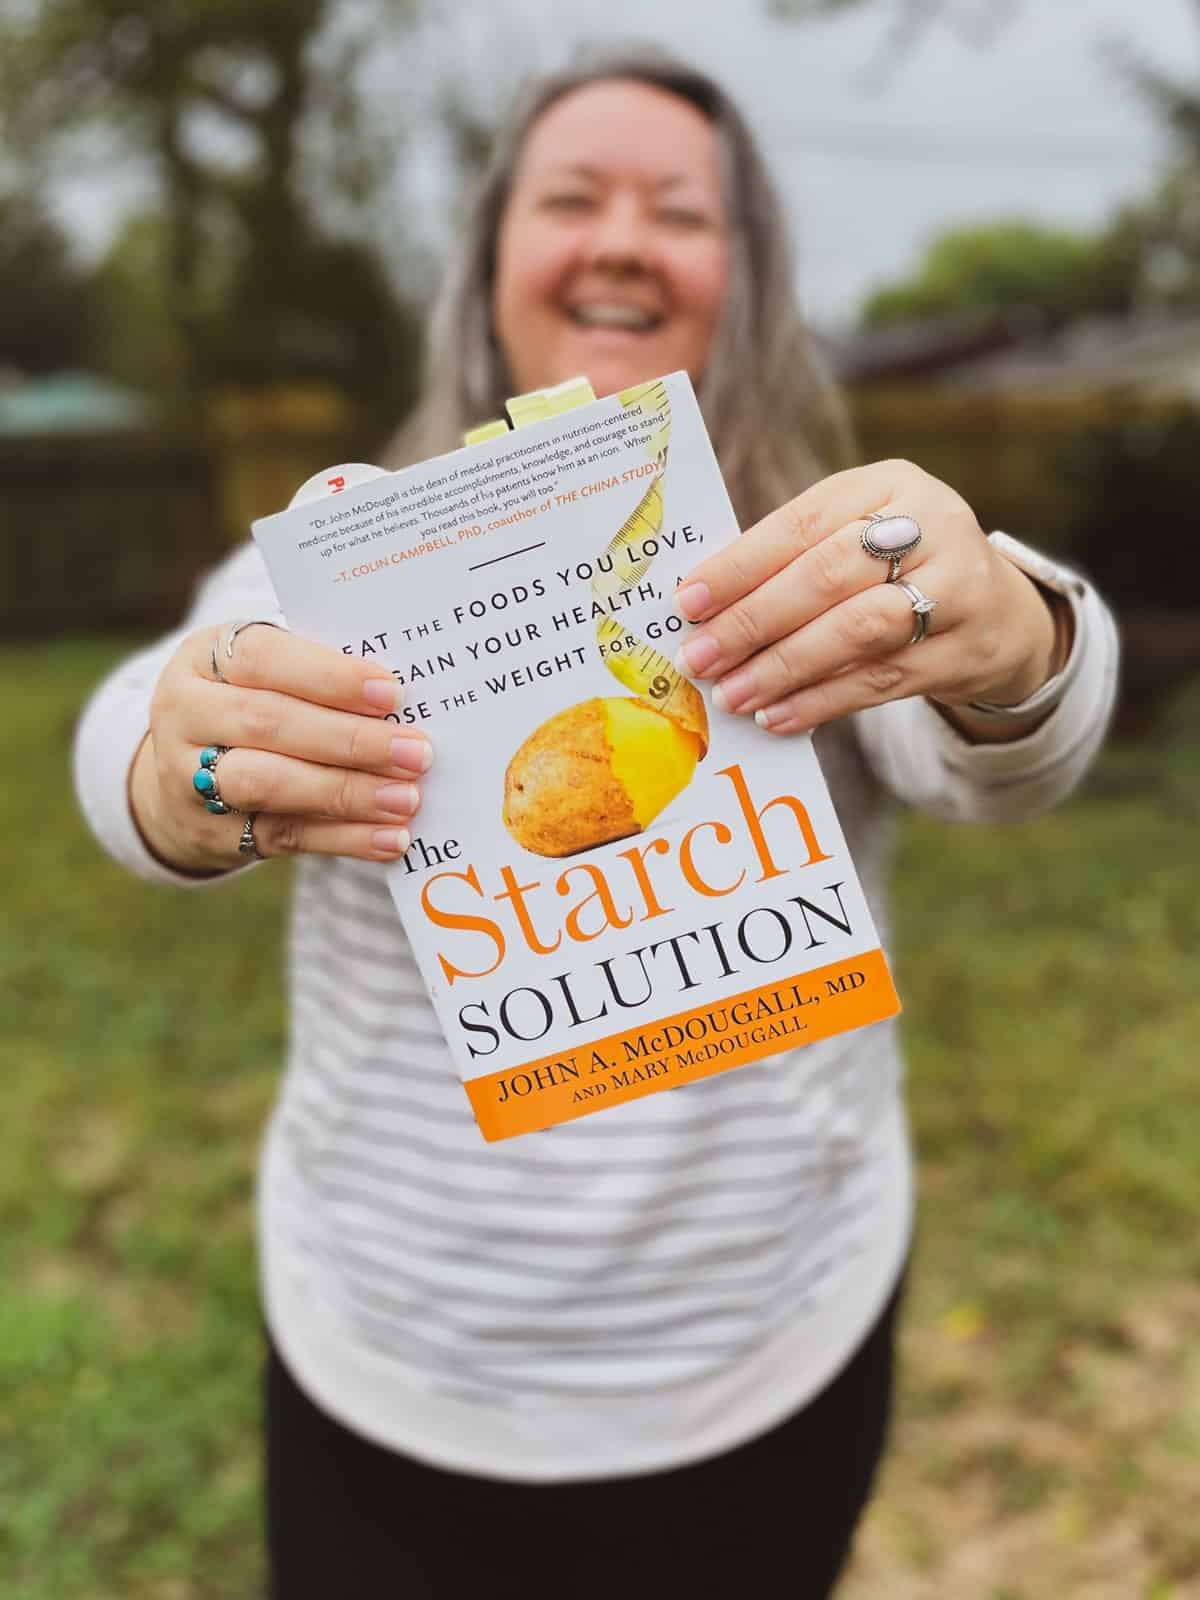 Abi Cowell of Very Veganish holding The Starch Solution book by John A. McDougall, MD and Mary McDougall